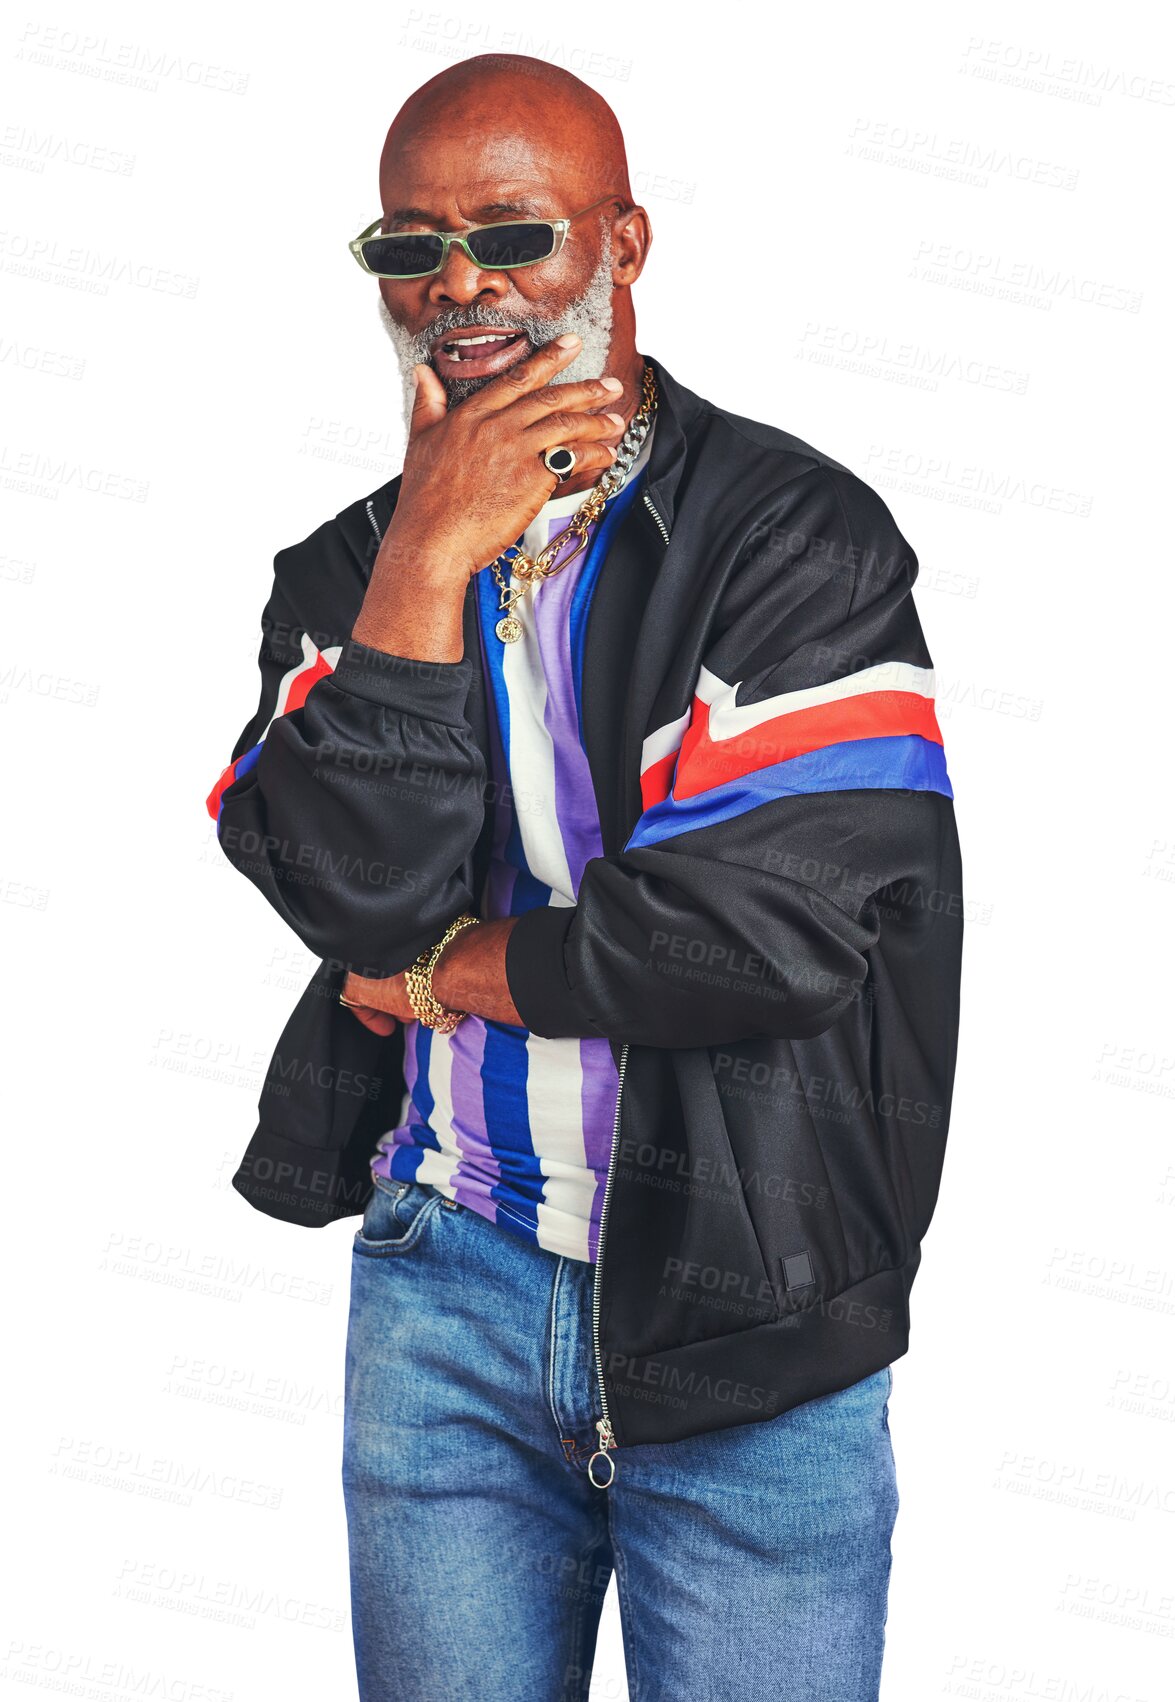 Buy stock photo Portrait, fashion and hip hop with a senior black man isolated on a transparent background for style. Retro, sunglasses and an elderly gangster or retired hipster on PNG in an urban clothes outfit 